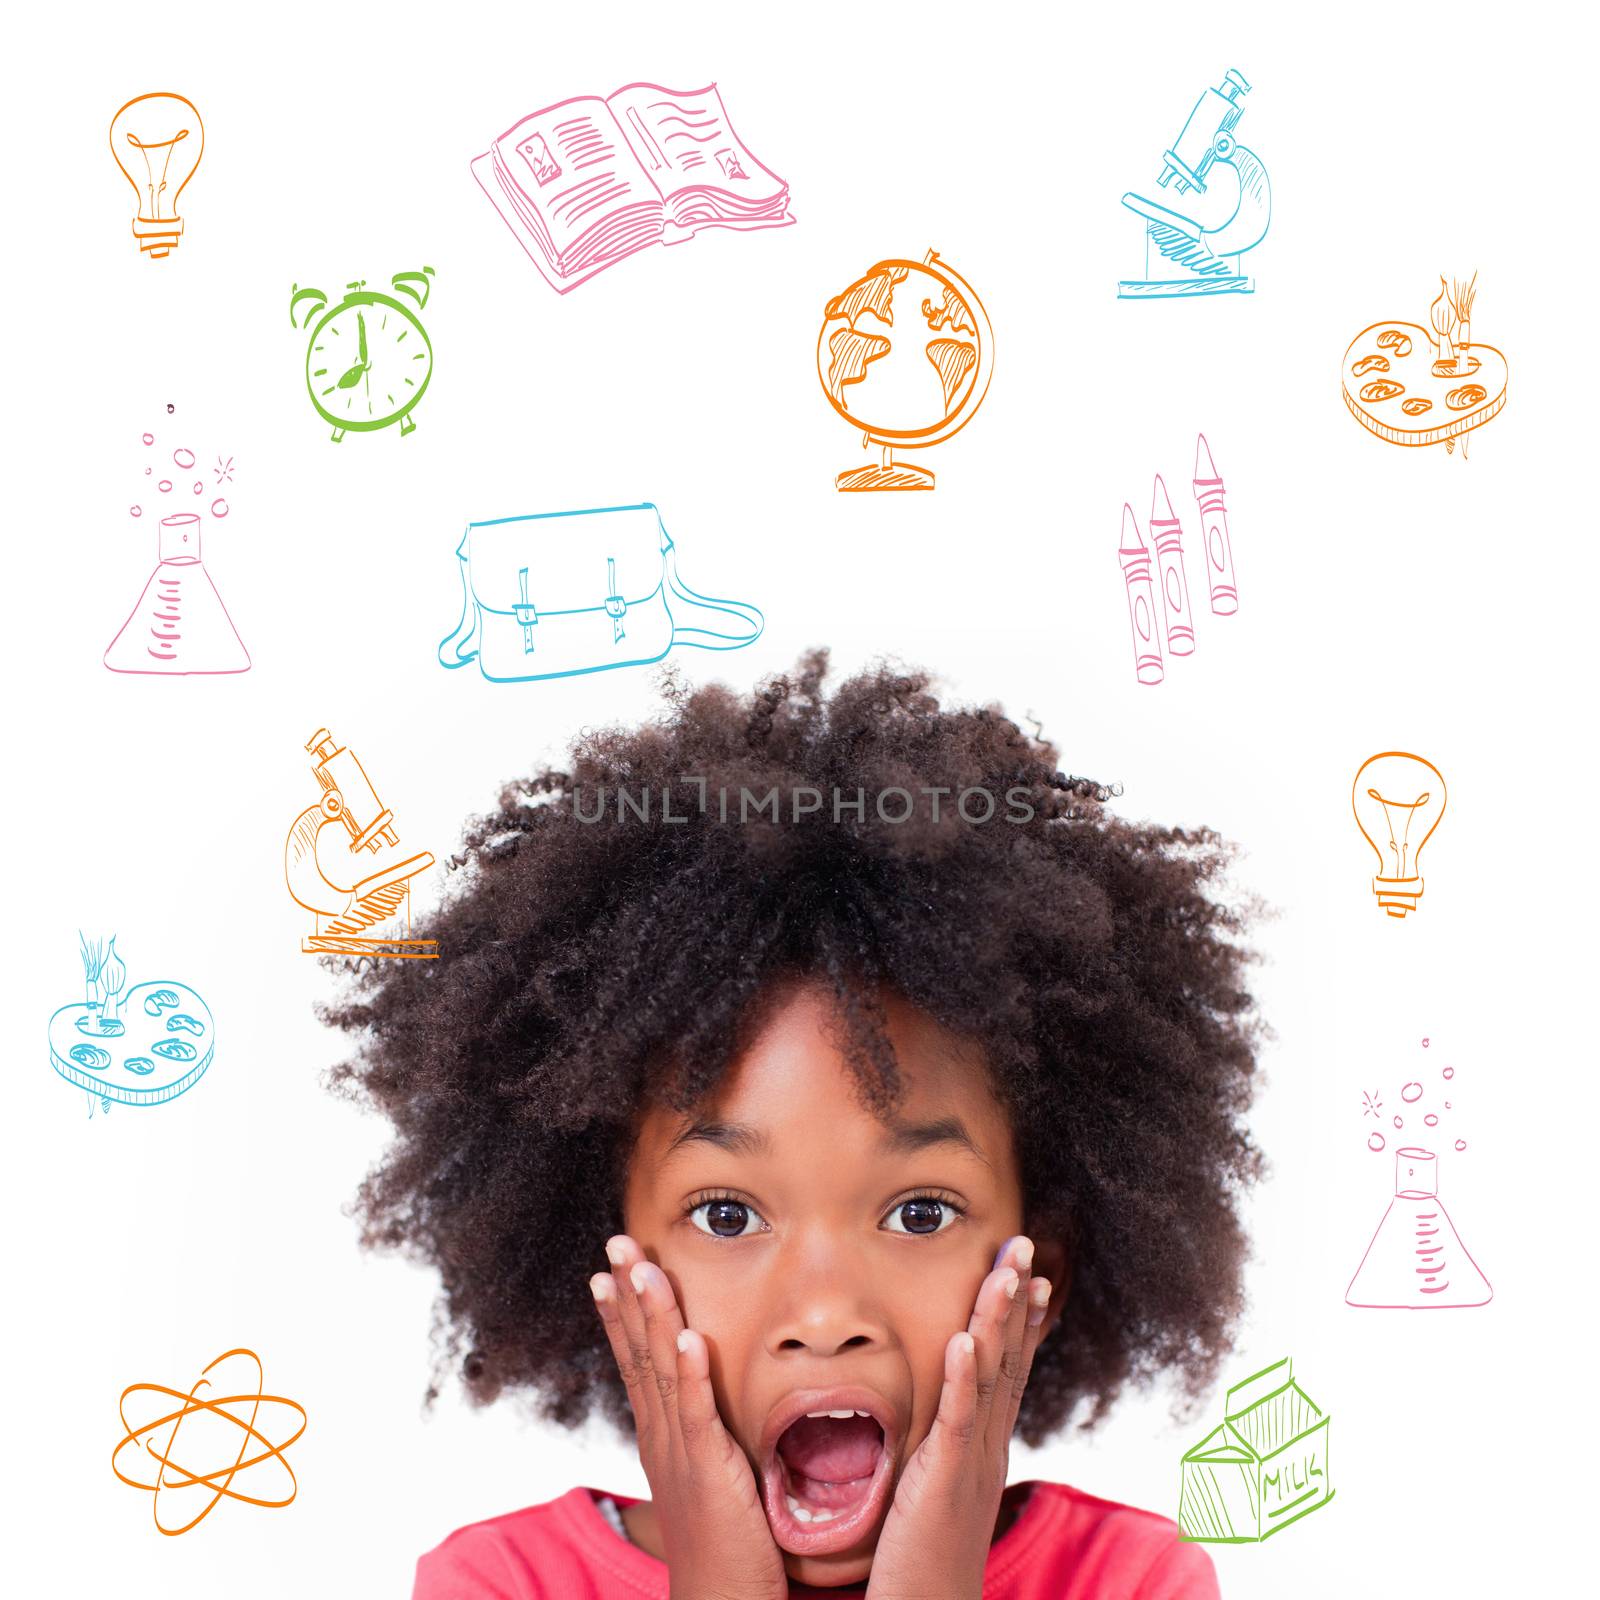 Composite image of school subjects doodles by Wavebreakmedia